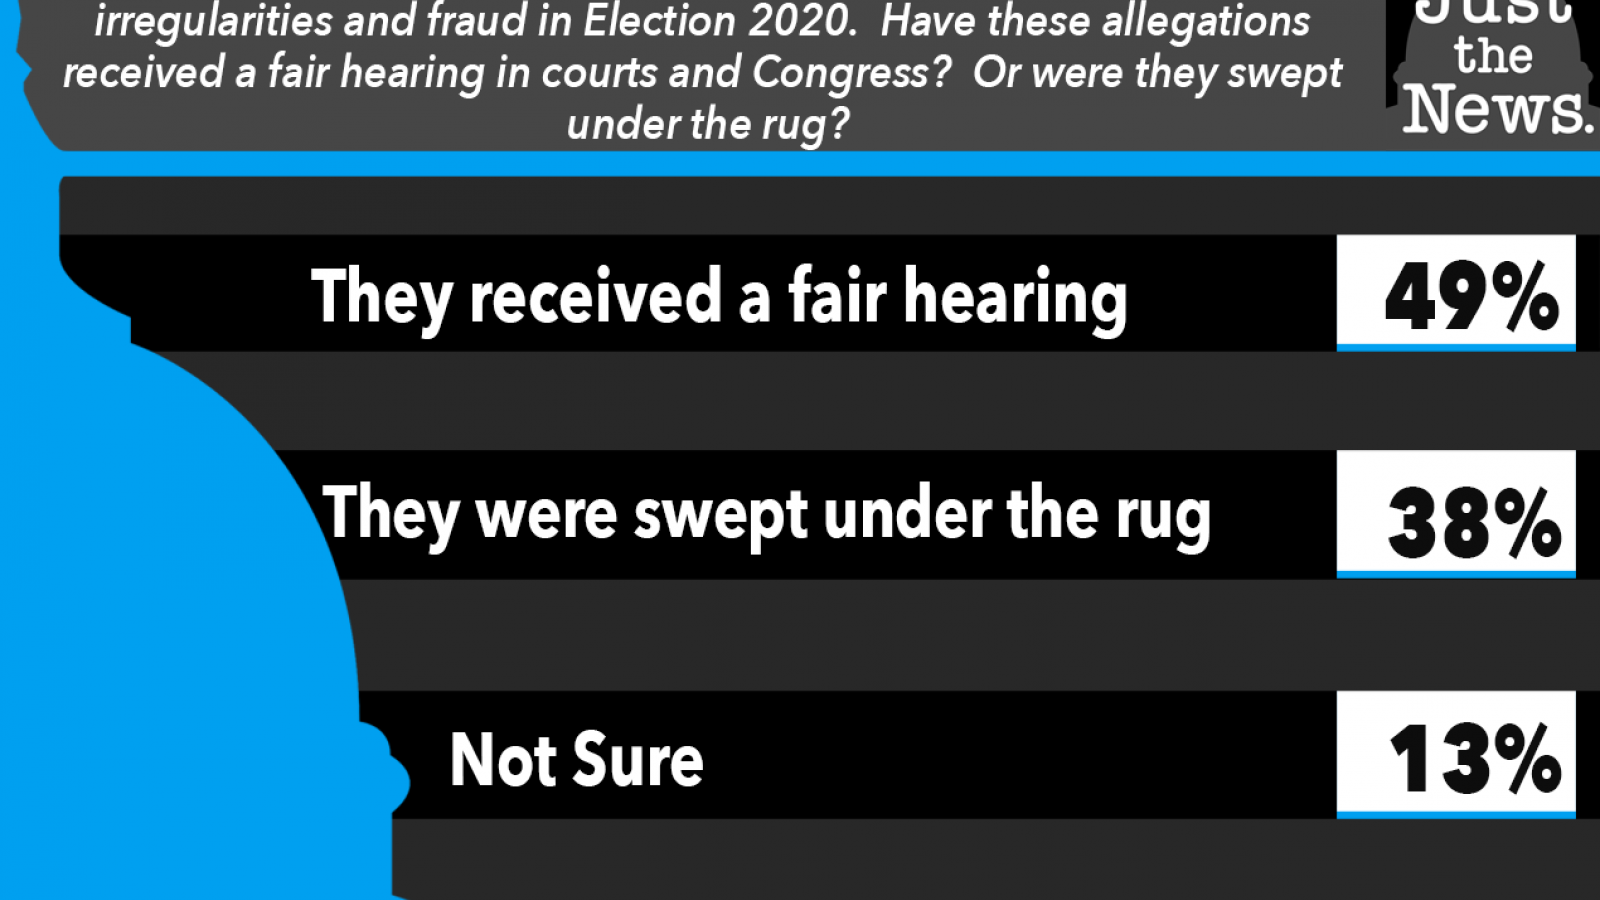 Just the News Poll, Did allegations of voter fraud receive a fair hearing?